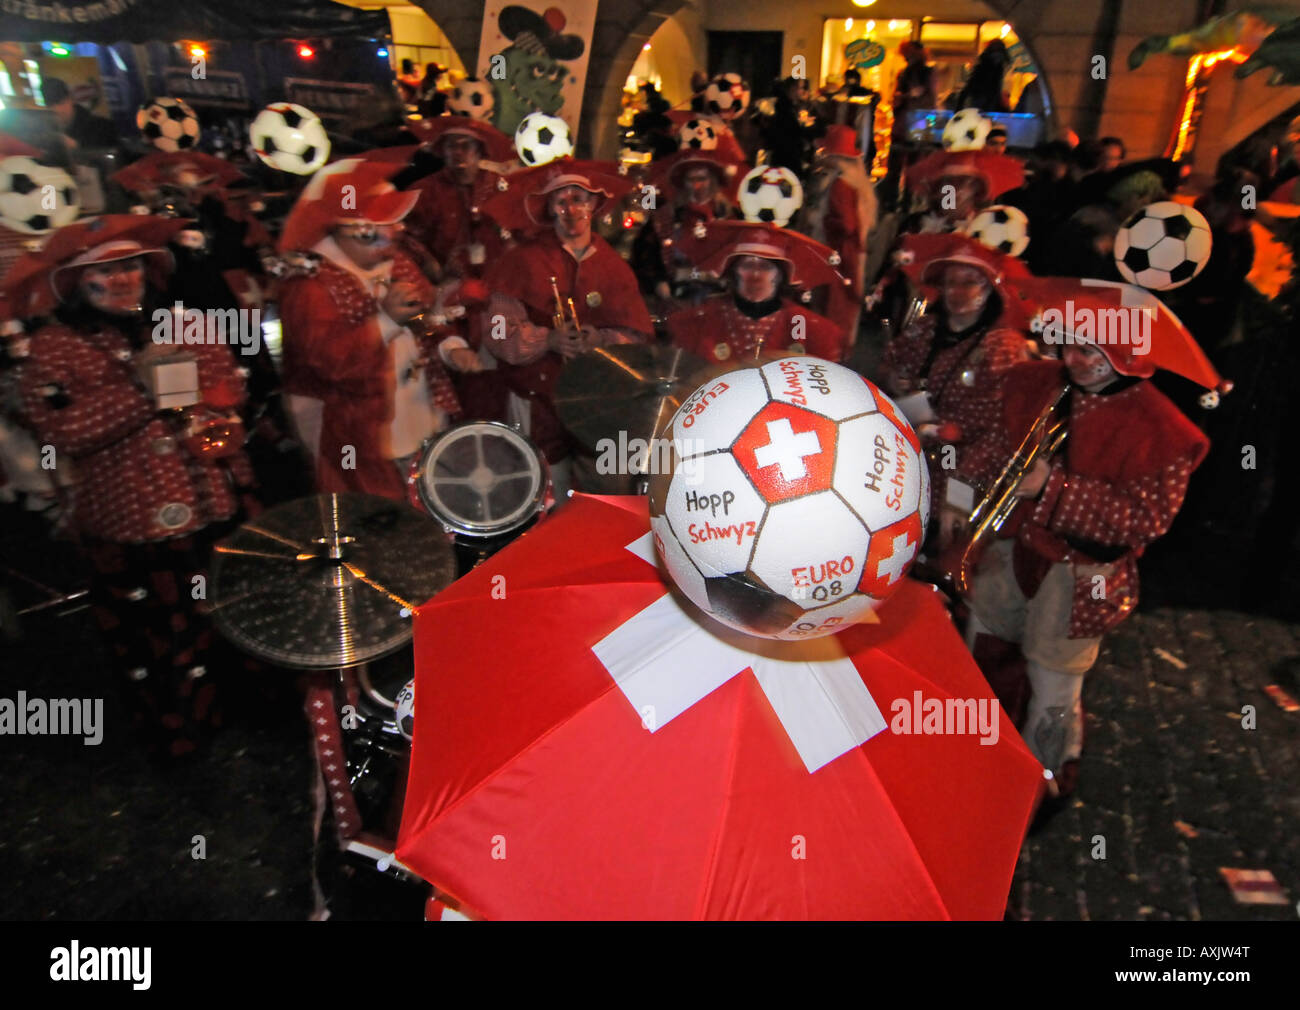 Swiss people celebrating the organisation of the Euro 2008 soccer championship during the Bern carnaval; Bern, Switzerland. Stock Photo